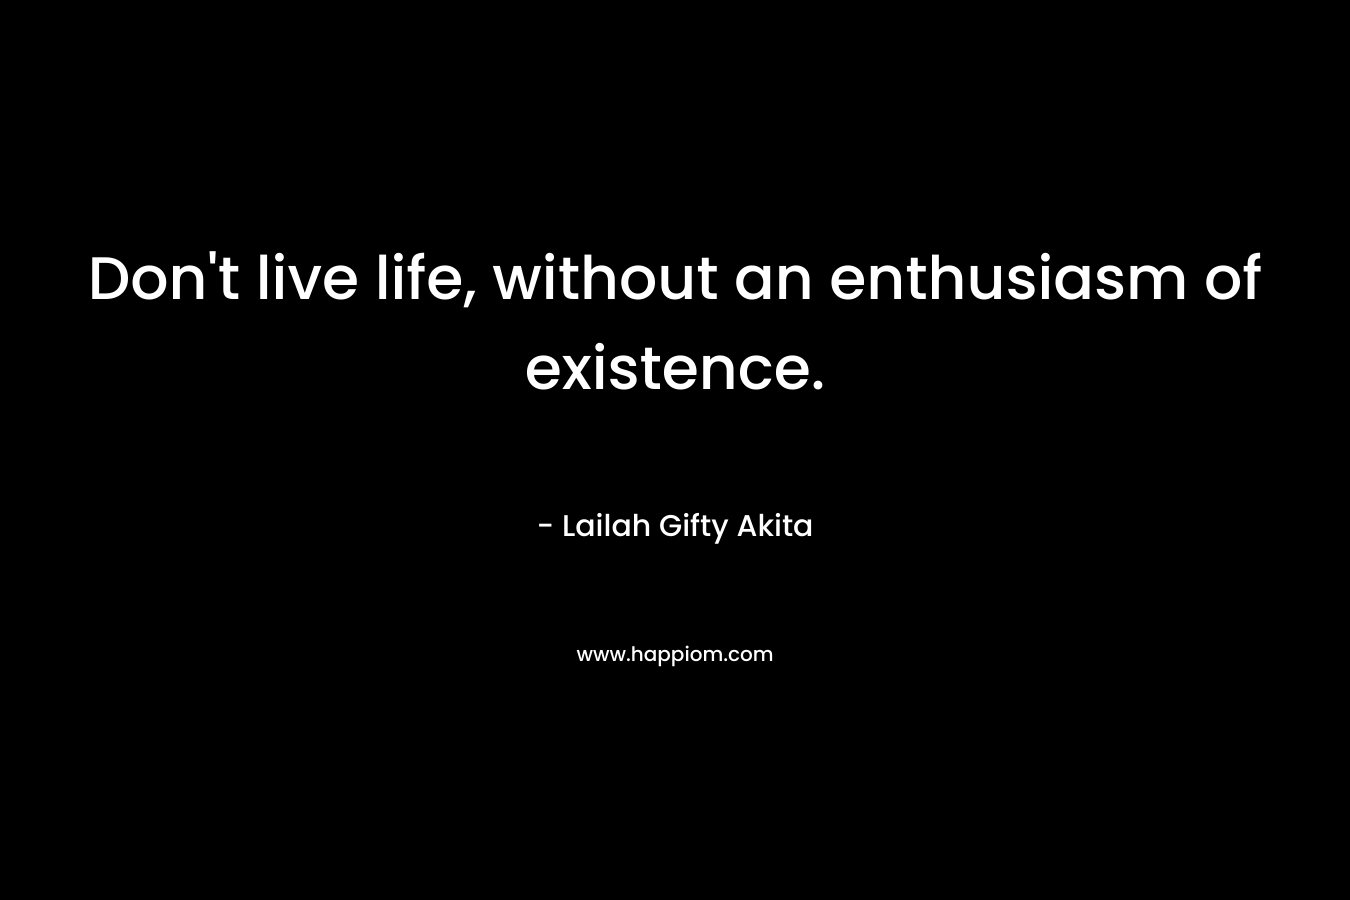 Don't live life, without an enthusiasm of existence.